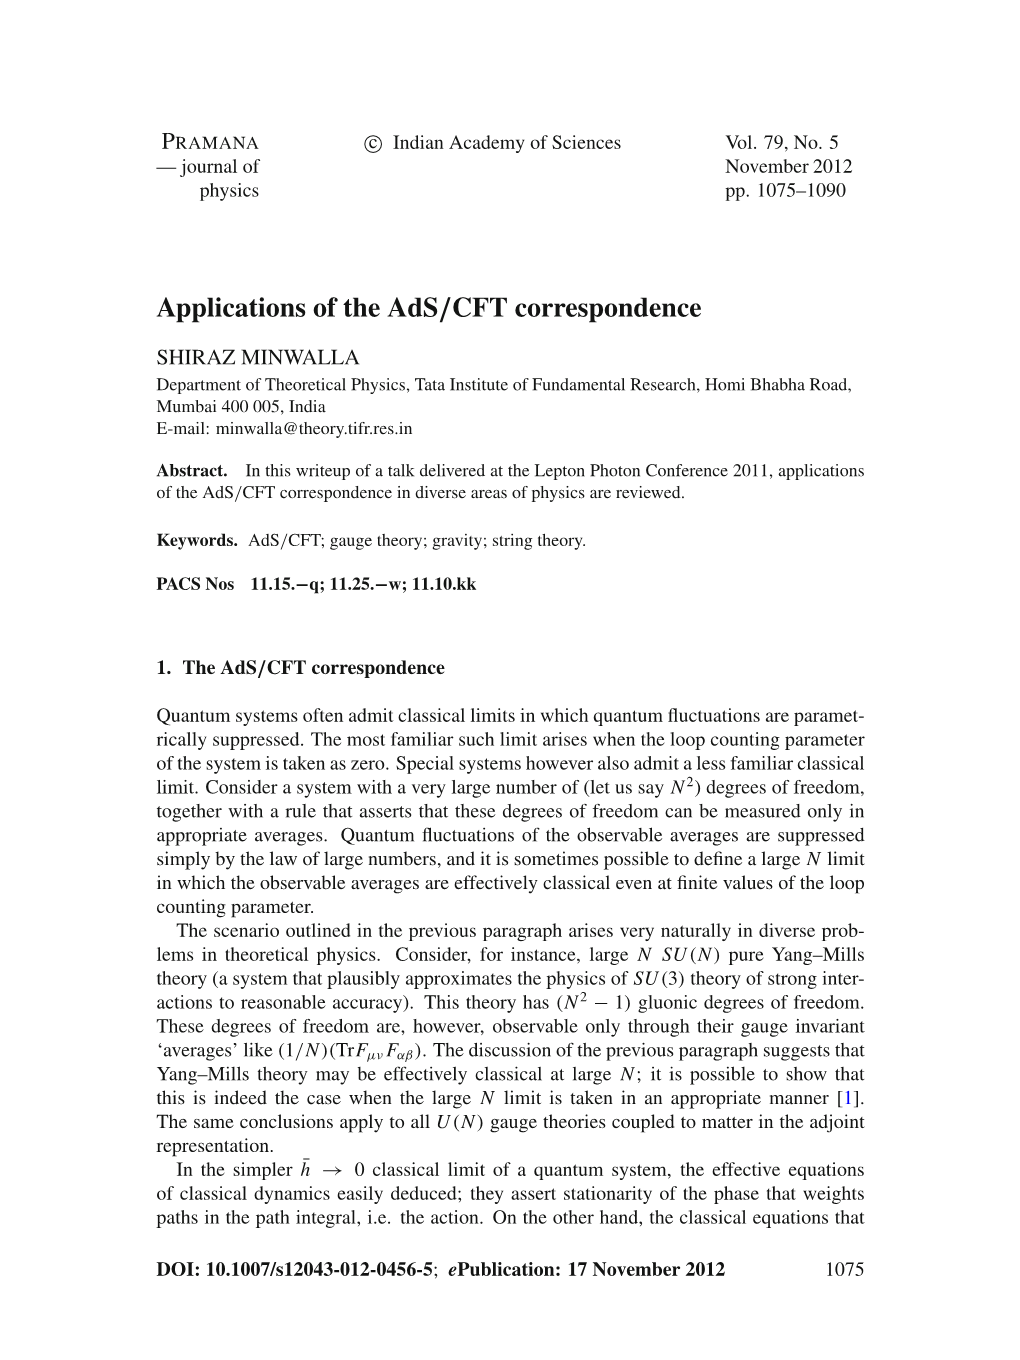 Applications of the Ads/CFT Correspondence